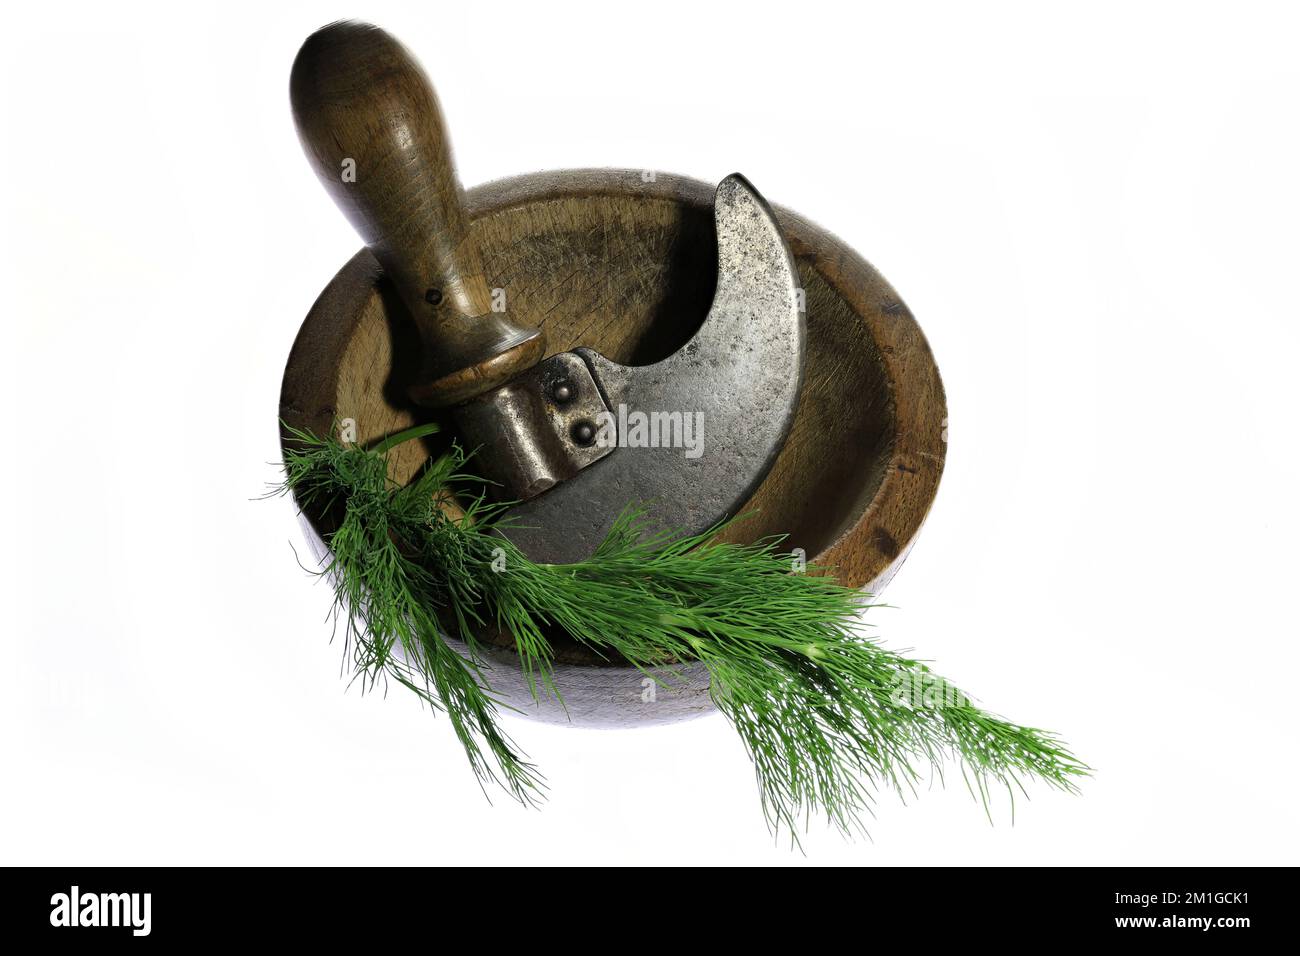 https://c8.alamy.com/comp/2M1GCK1/vintage-herb-chopper-with-fresh-dill-isolated-on-white-background-2M1GCK1.jpg